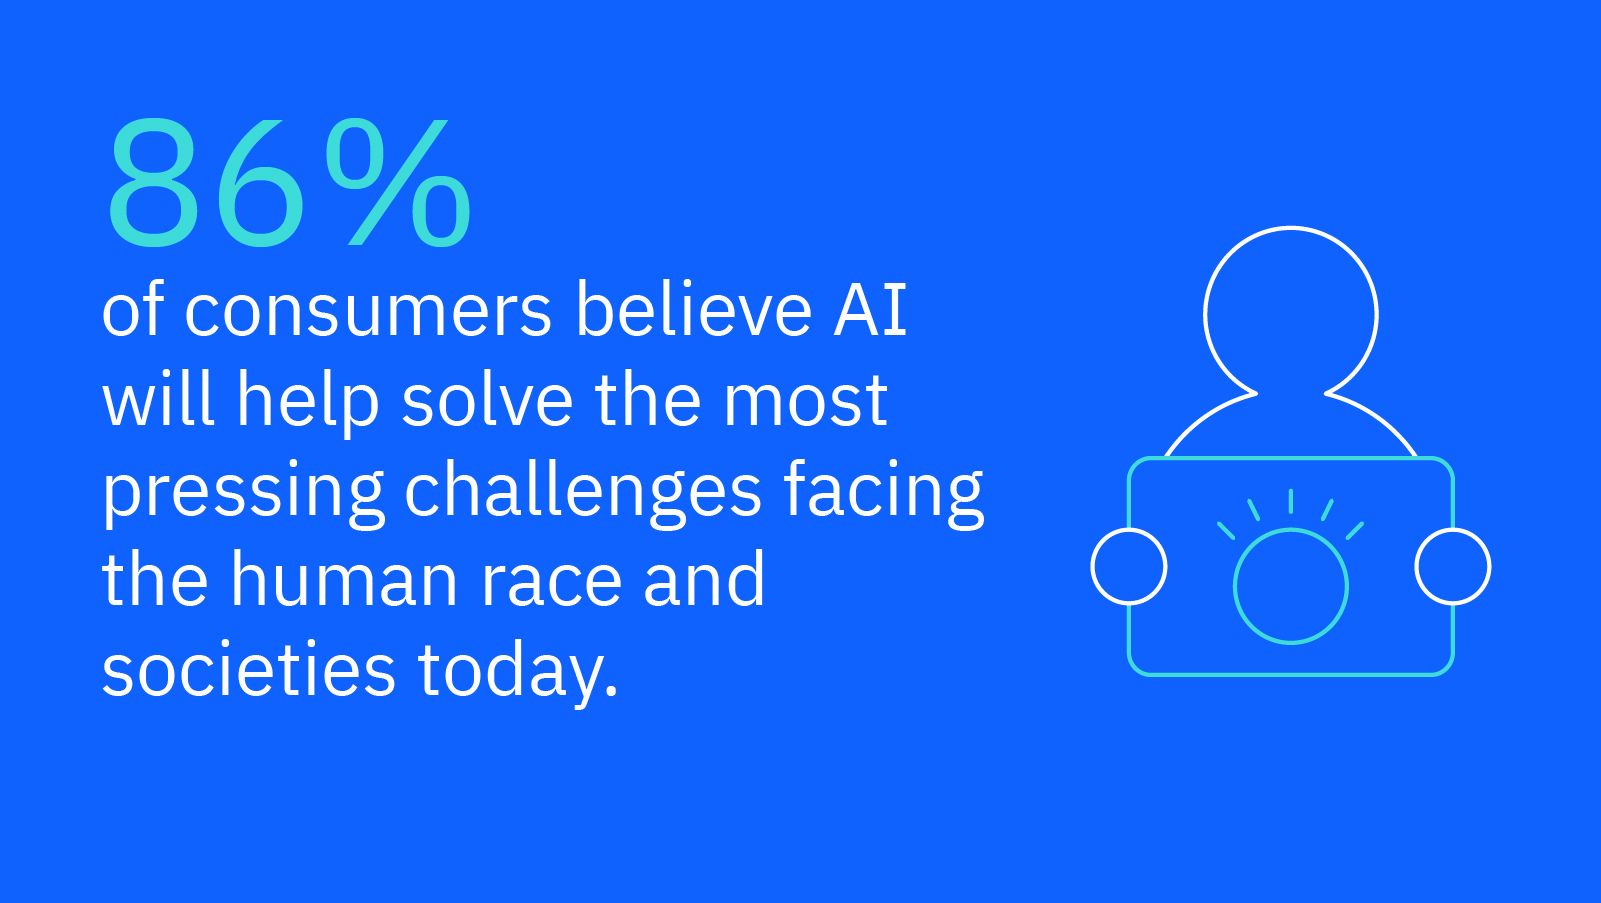 86% of consumers believe AI will help solve the most pressing challenges facing the human race and societies today.